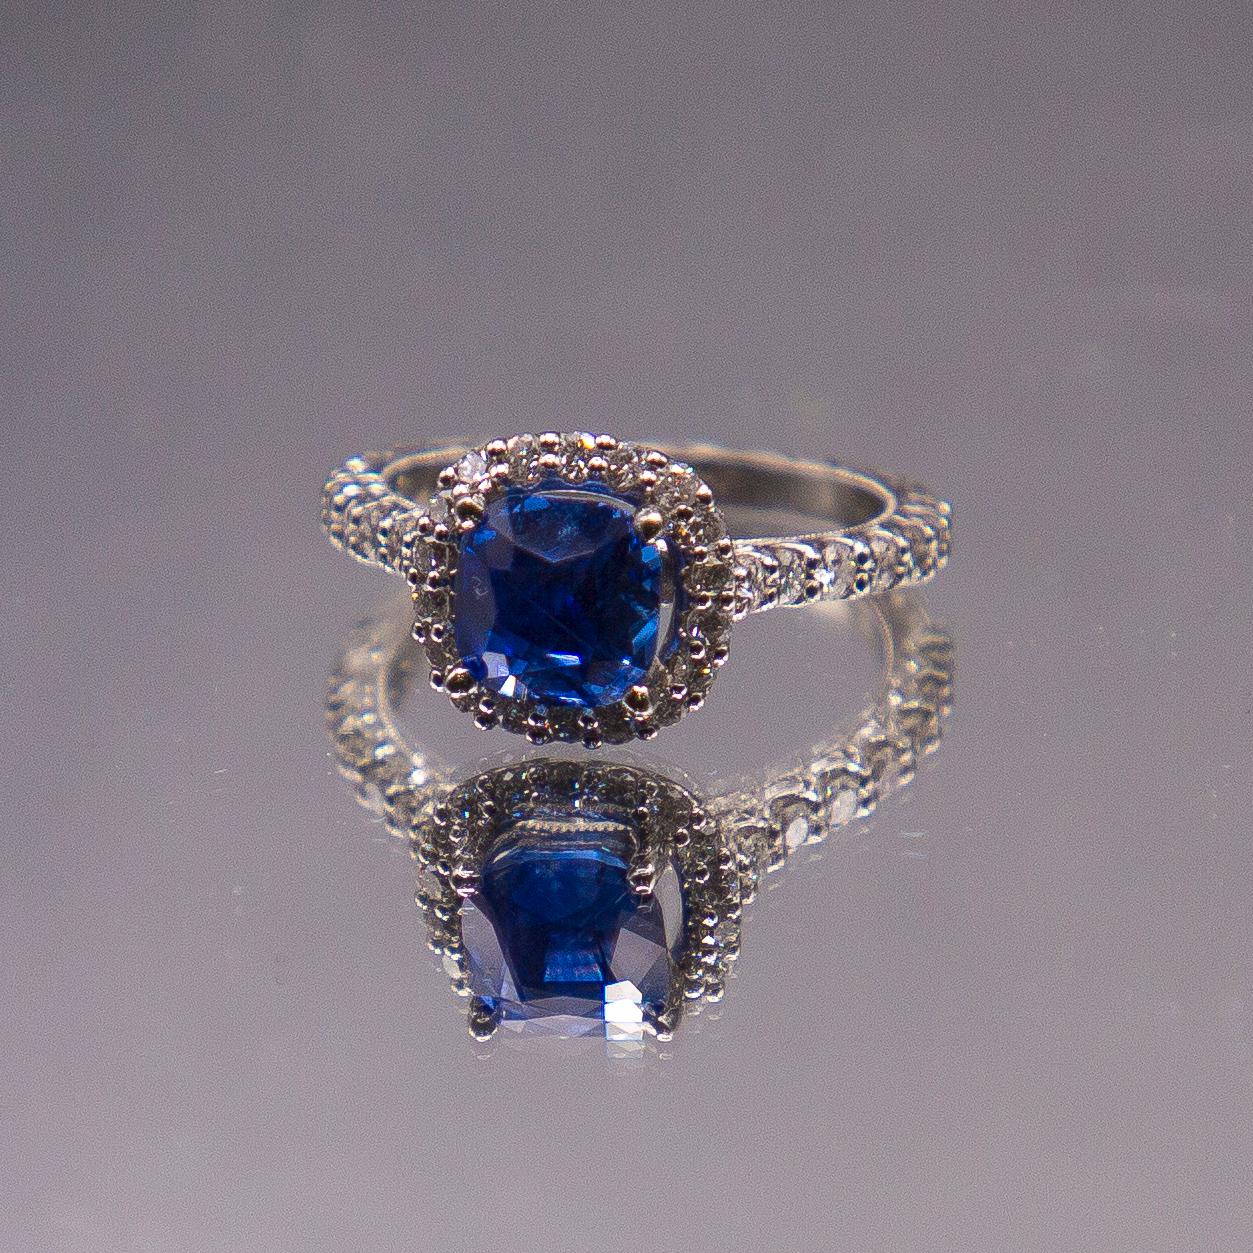 A rare and highly transparent No Heat Burma (Myanmar)  intense blue sapphire weighing 3.32 carats modified cushion cut,  adorns a handcrafted one of a kind engagement ring set in 950 Platinum. Platinum is hand engraved and encrusted with F colour